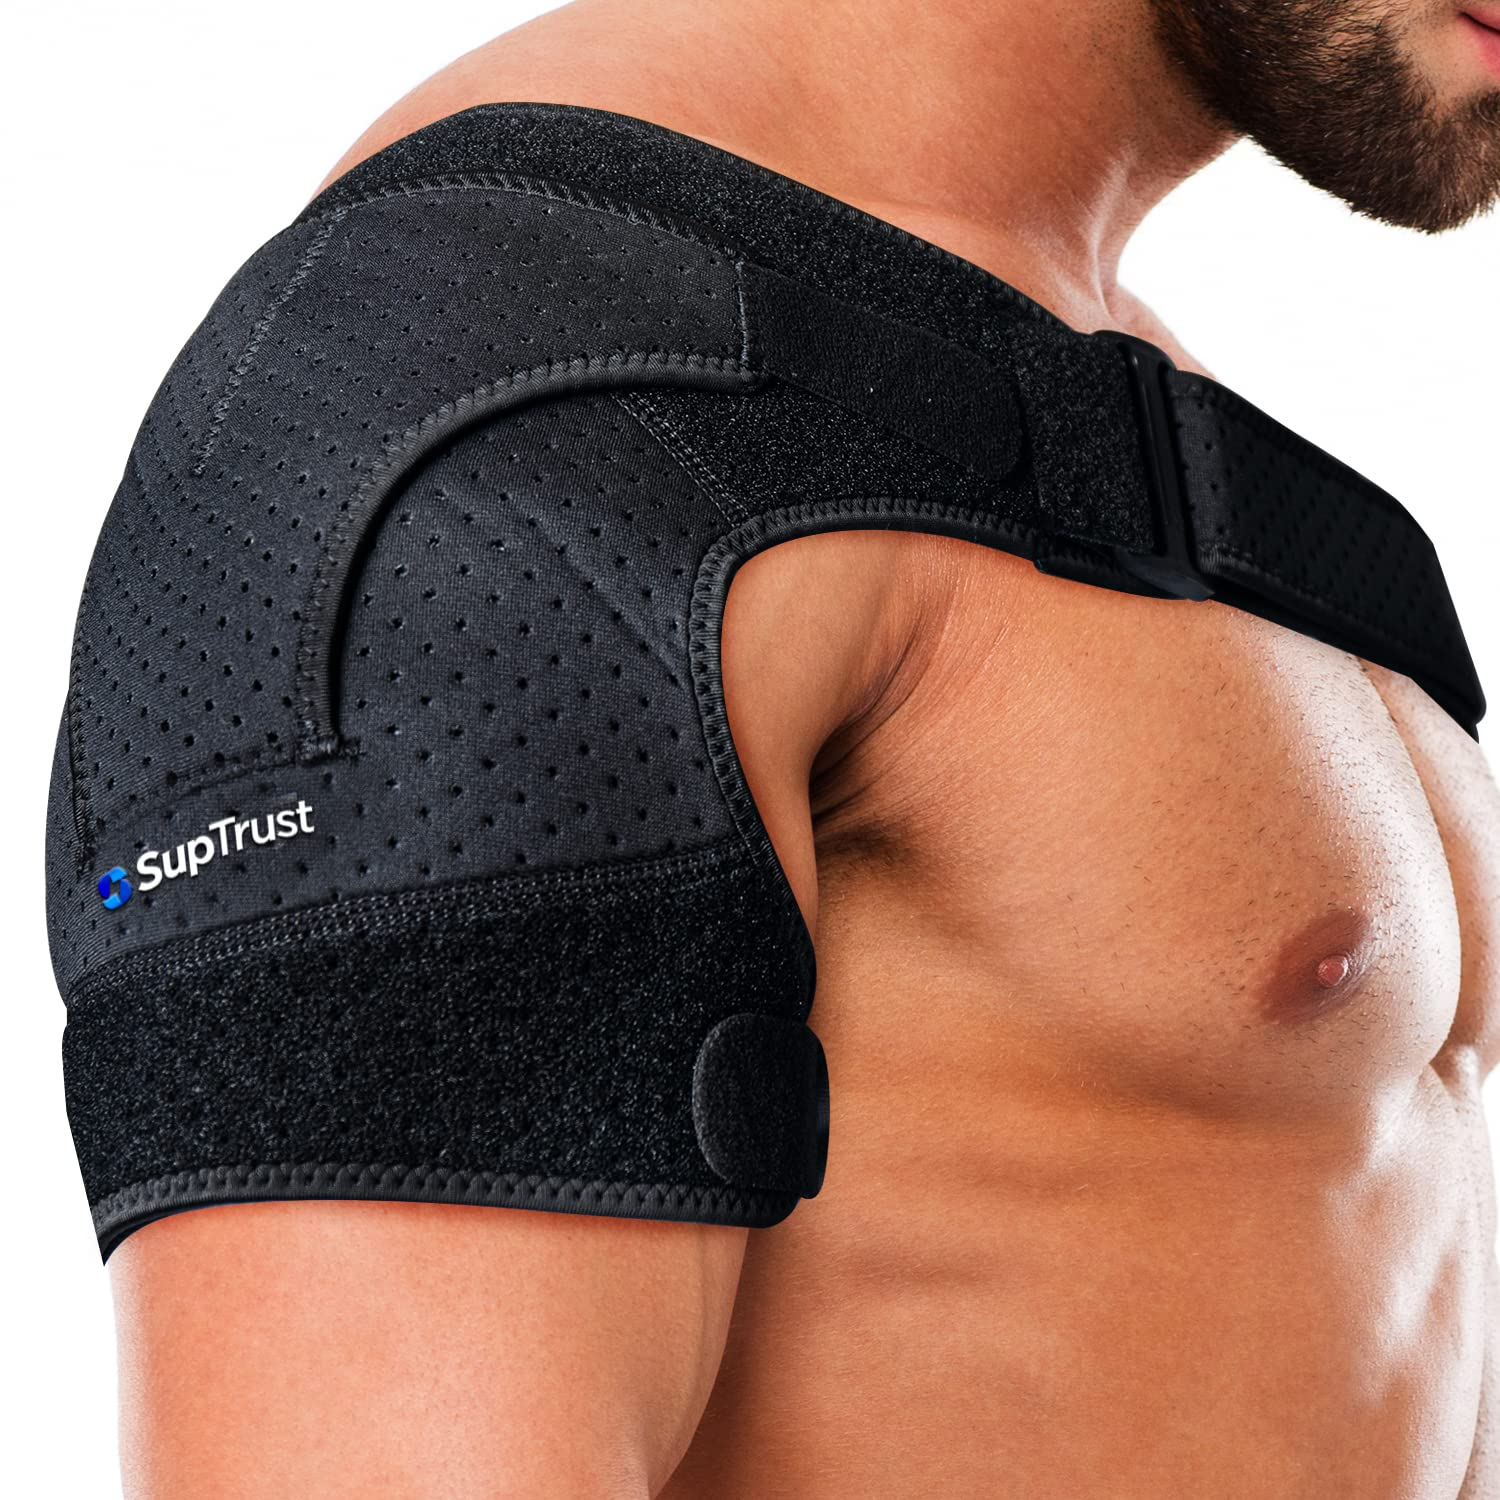 Suptrust Recovery Shoulder Brace for Men and Women, Shoulder Stability Support Brace, Adjustable Fit Sleeve Wrap, Relief for Shoulder Injuries and Tendonitis, One Size Regular, Shoulder Pain Relief, Support and Compression, for Torn Rotator Cuff, AC Joint Pain Relief